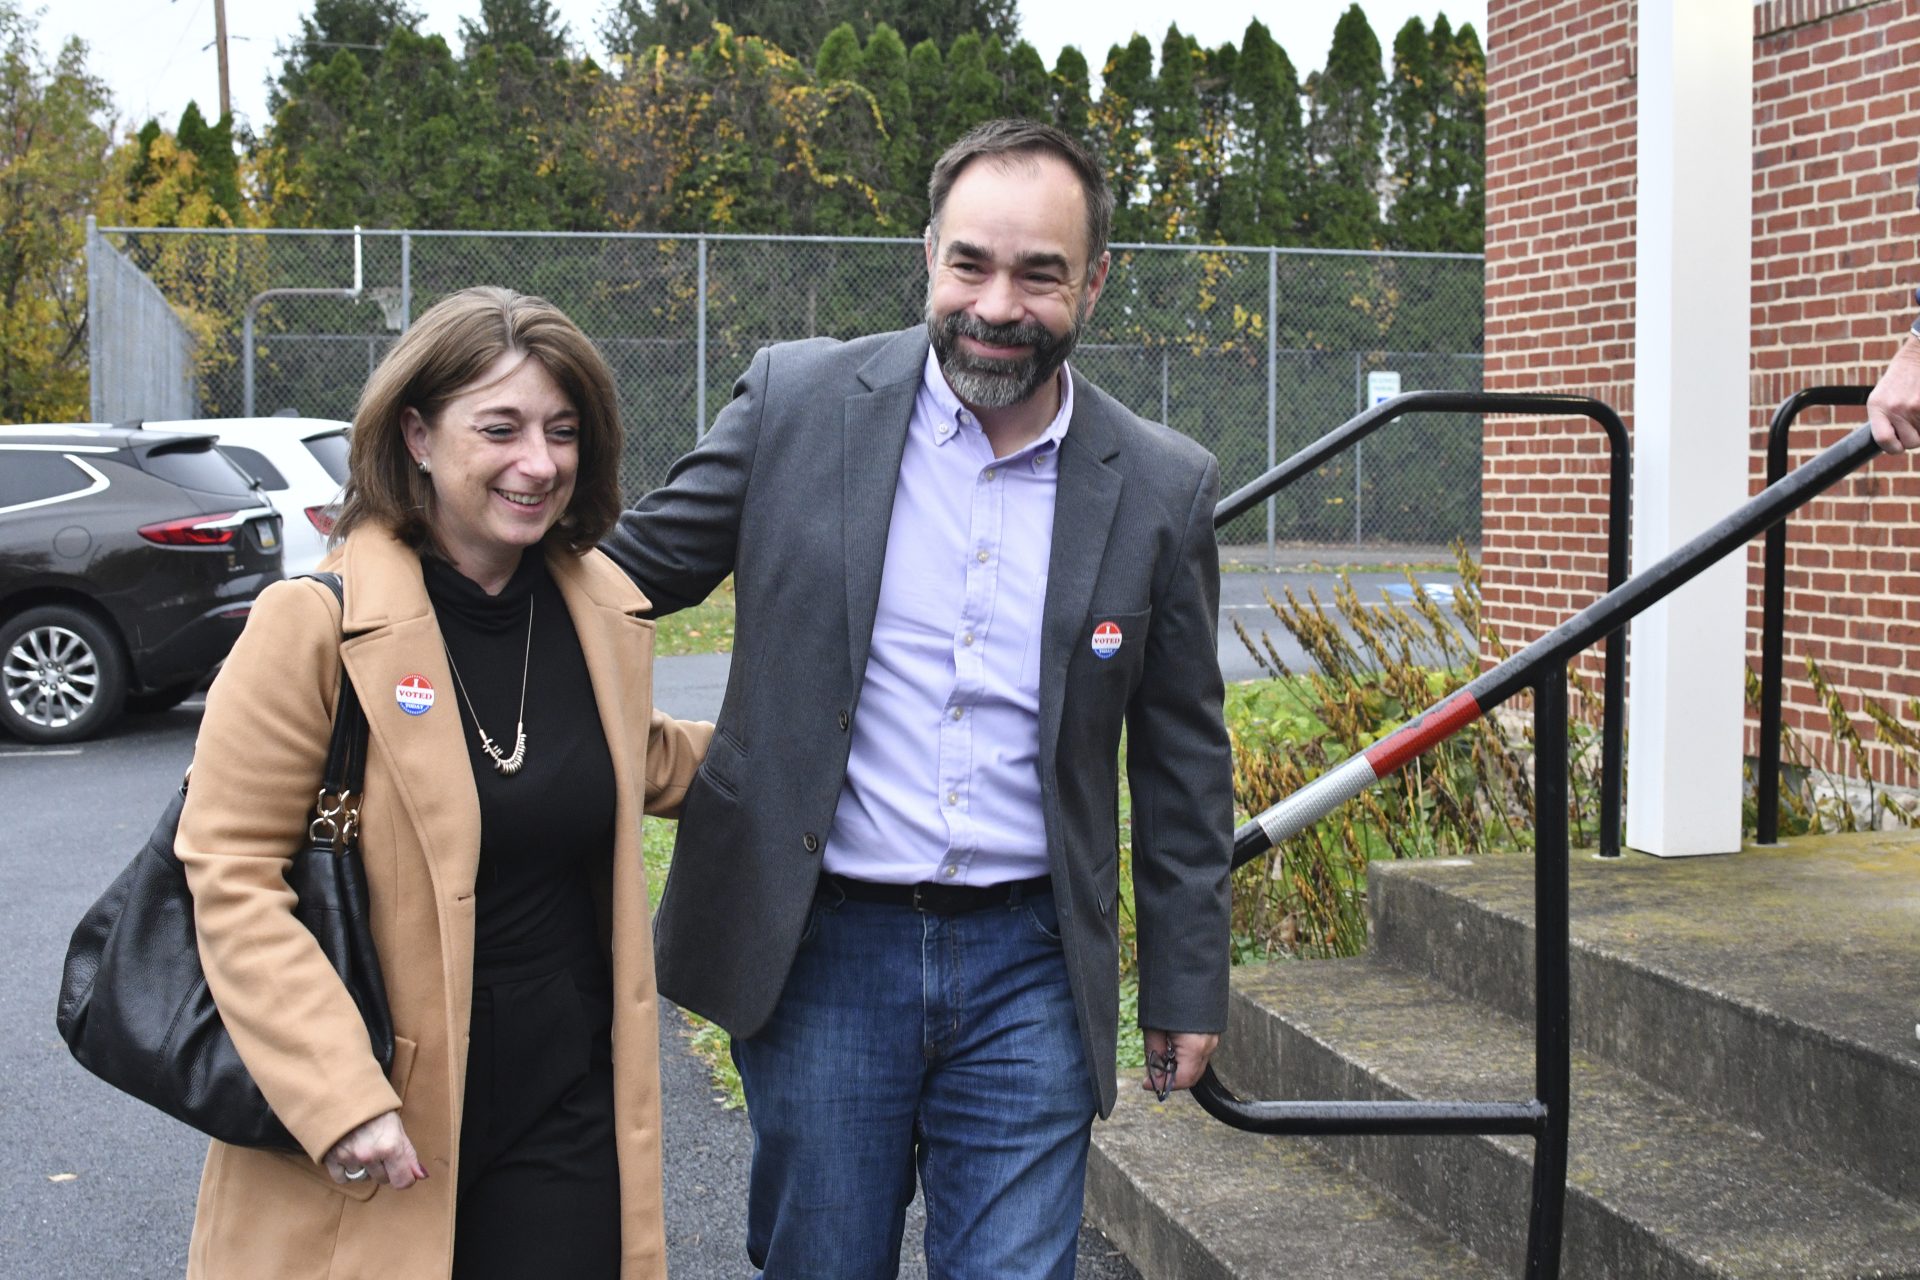 Kevin Brobson, the Republican candidate for an open seat on Pennsylvania's state Supreme Court, leaves with his wife Lauren after they voted at their polling place at Fishing Creek Community Center, Nov. 2, 2021, in Harrisburg, Pa.